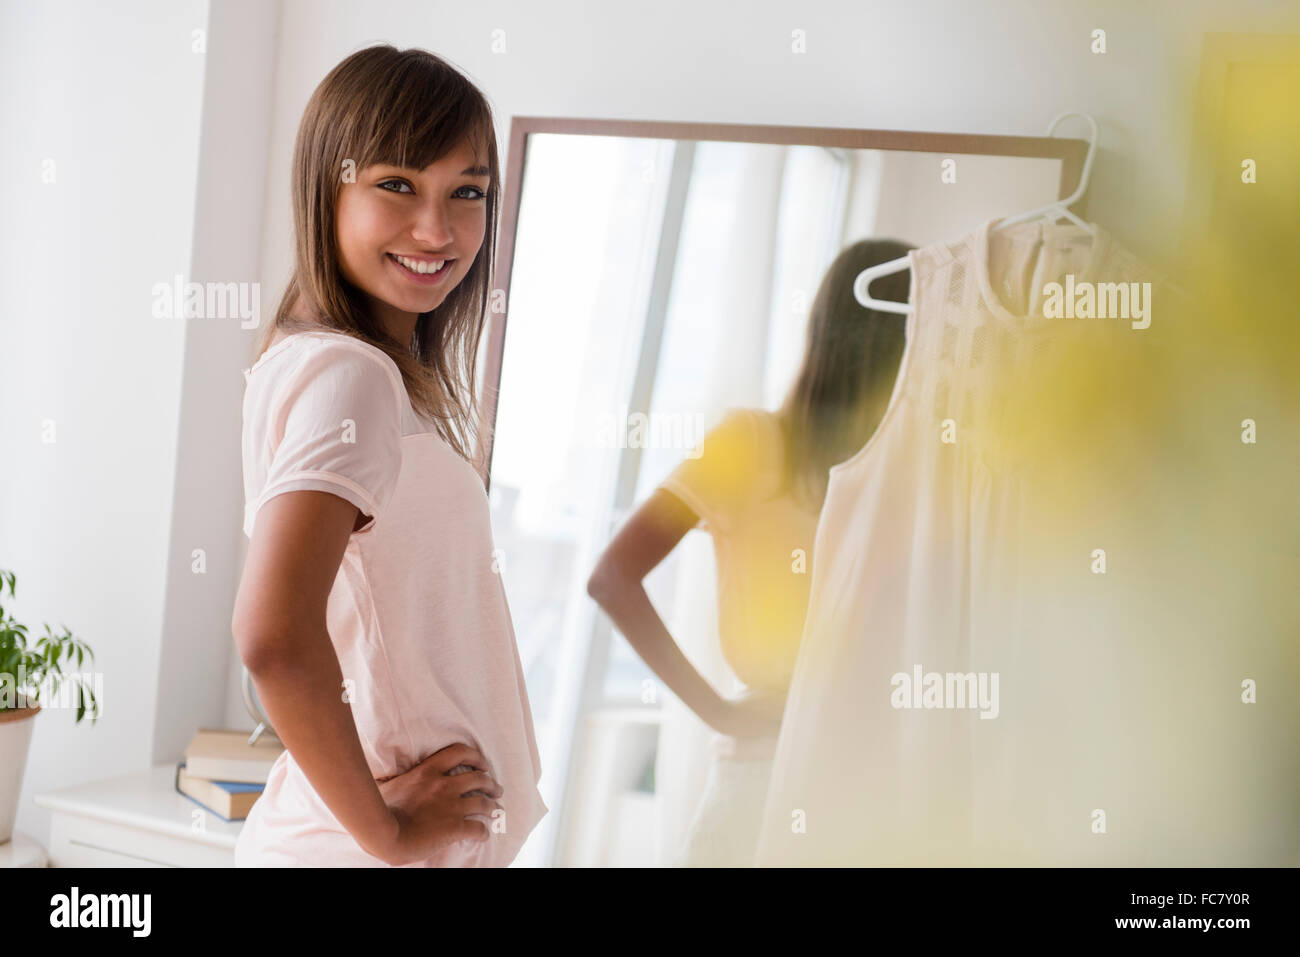 Mixed race woman smiling in front of mirror Stock Photo